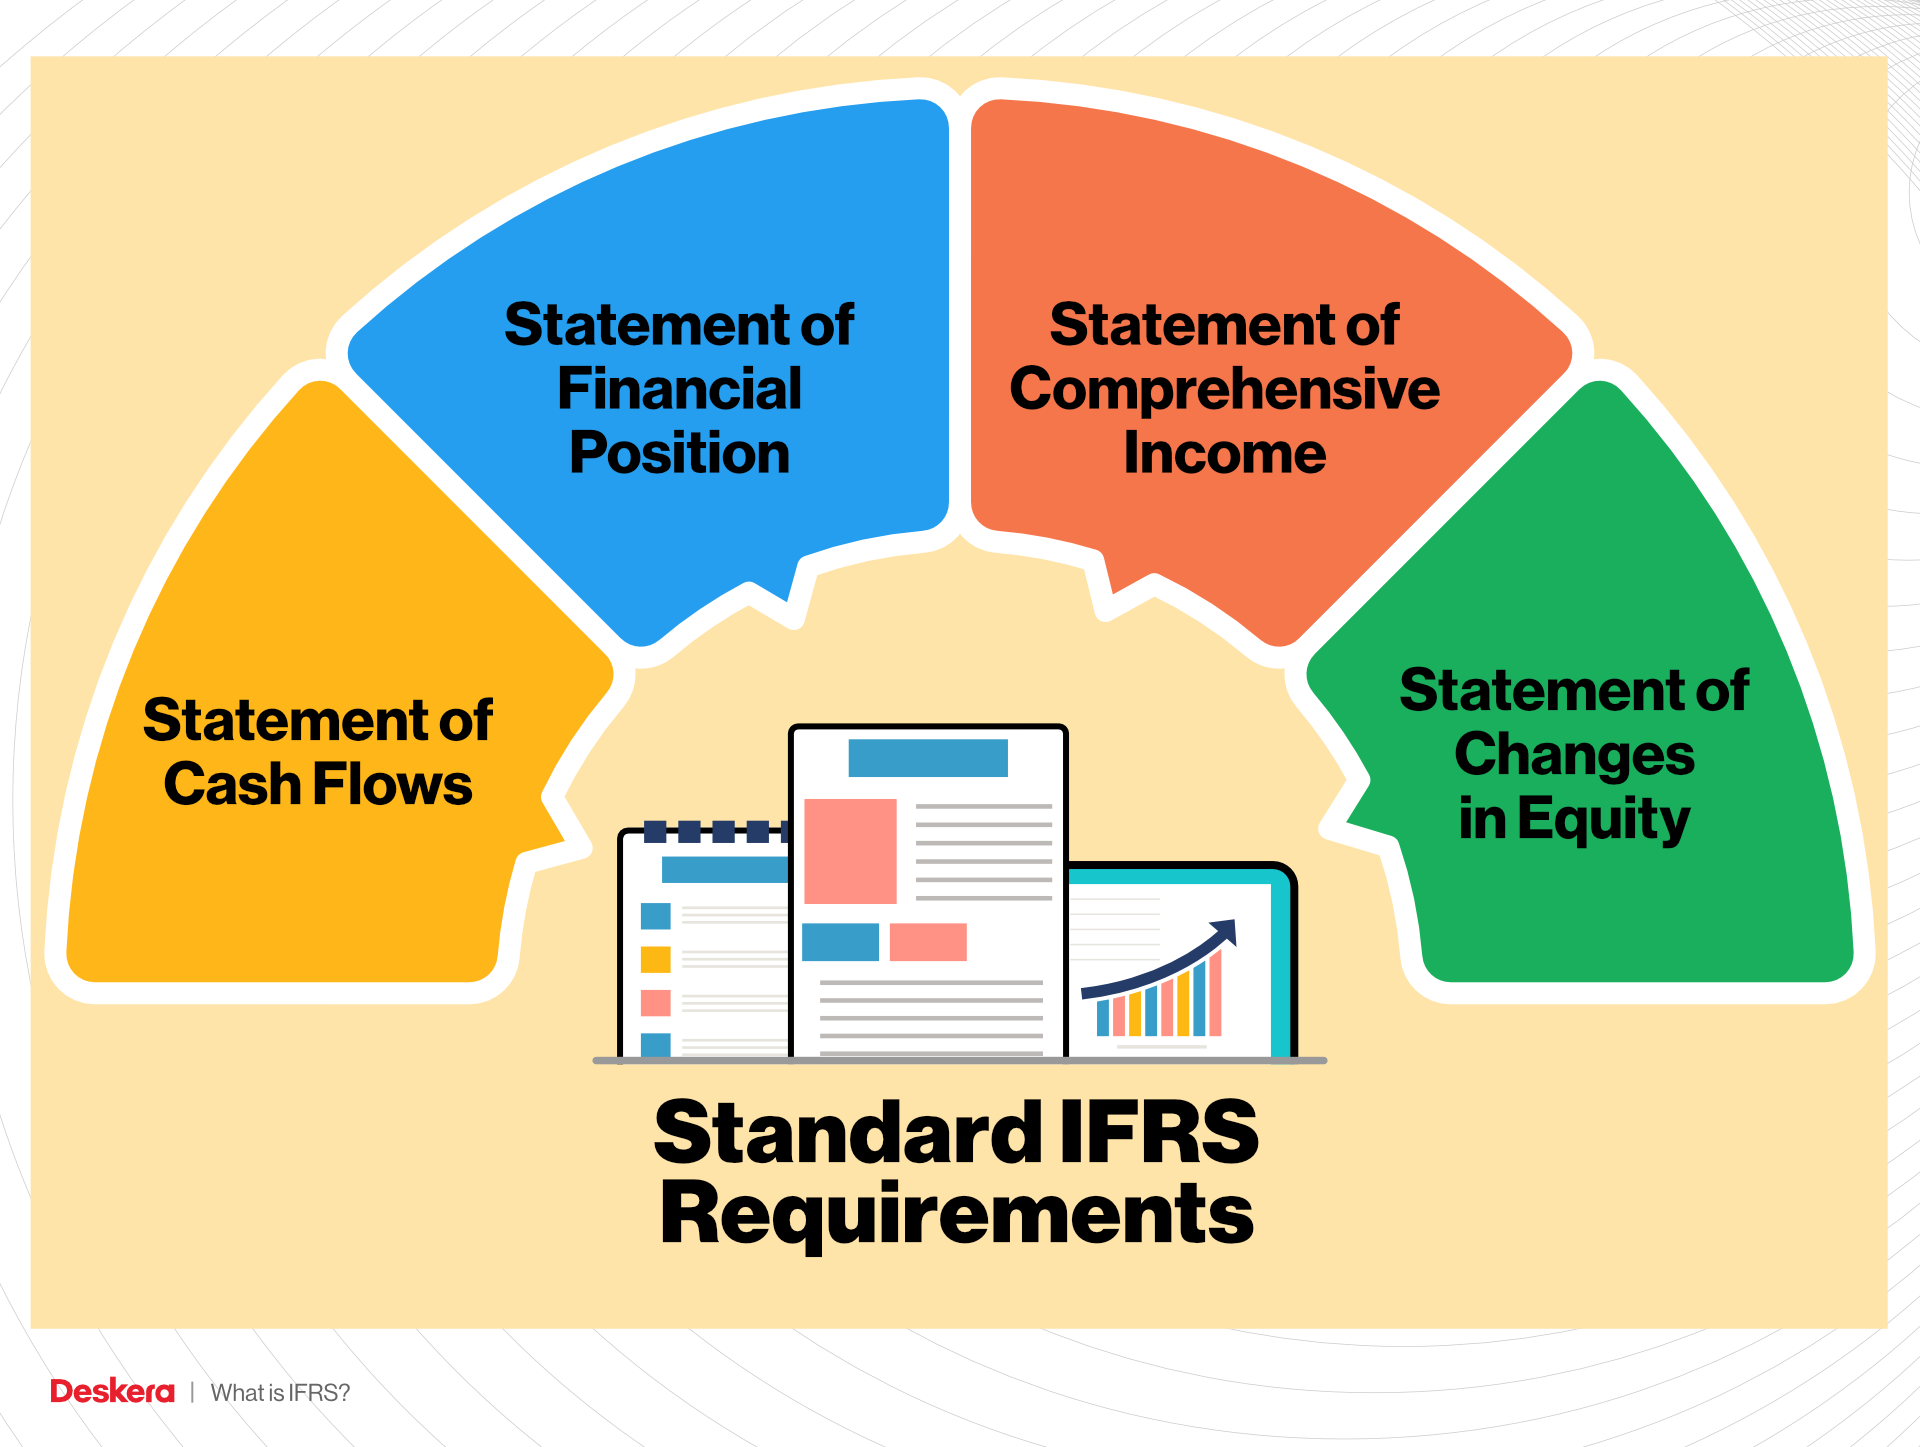 Standard IFRS Requirements